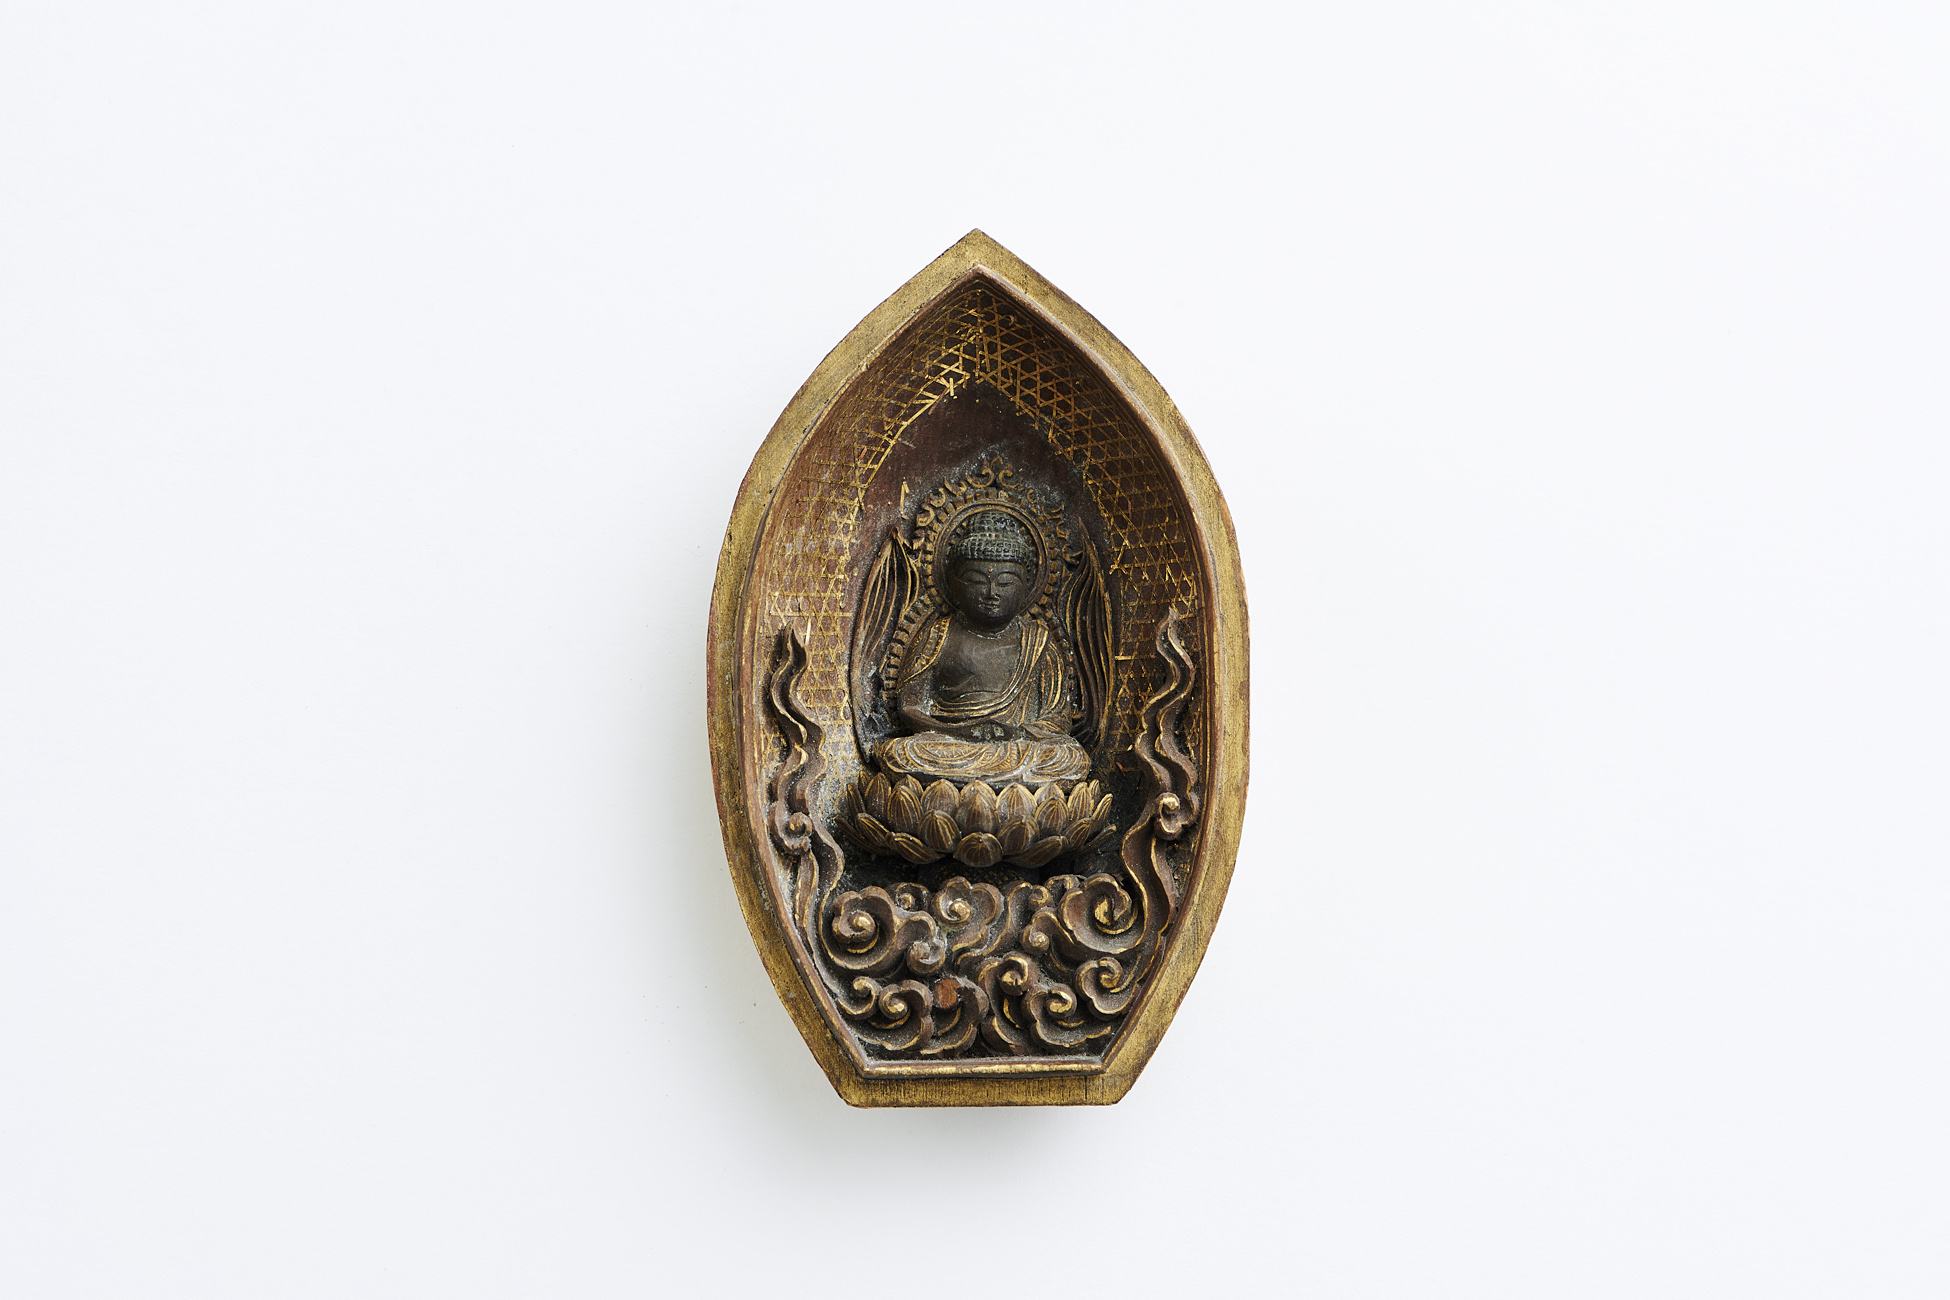 New Arrival “Amitabha Incense Container”